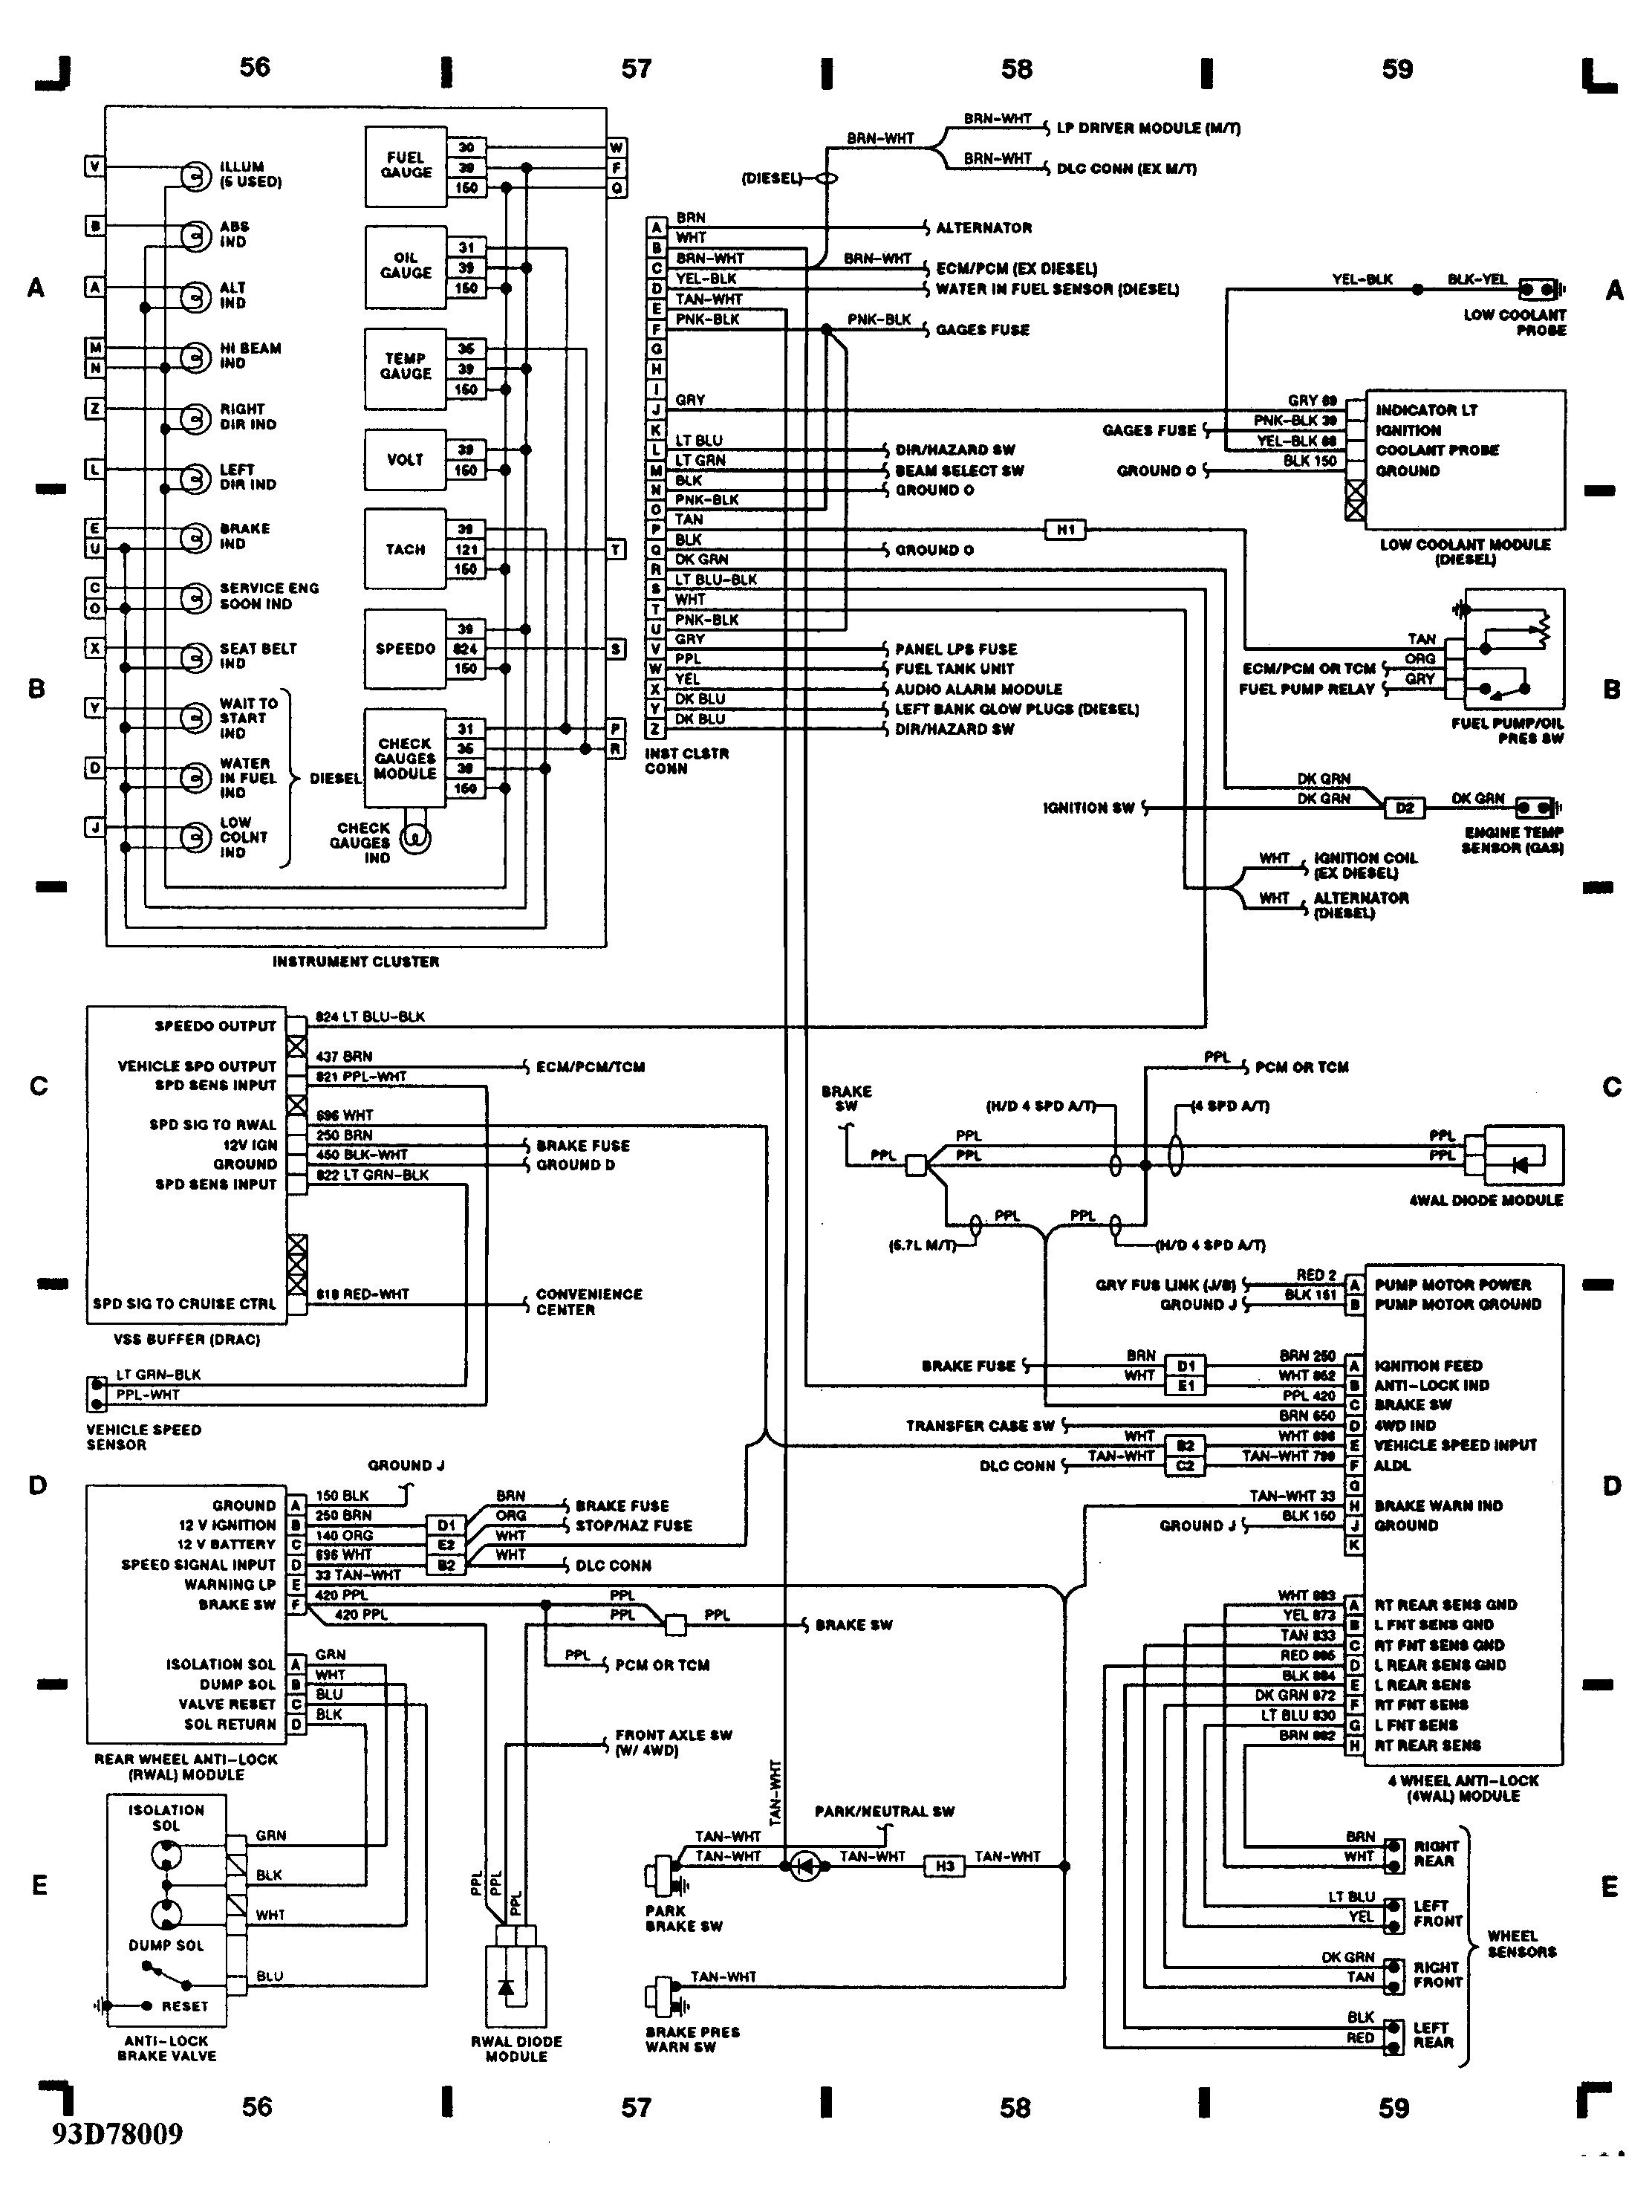 Wiring Diagram For 2004 Gmc Envoy Complete Wiring Diagram